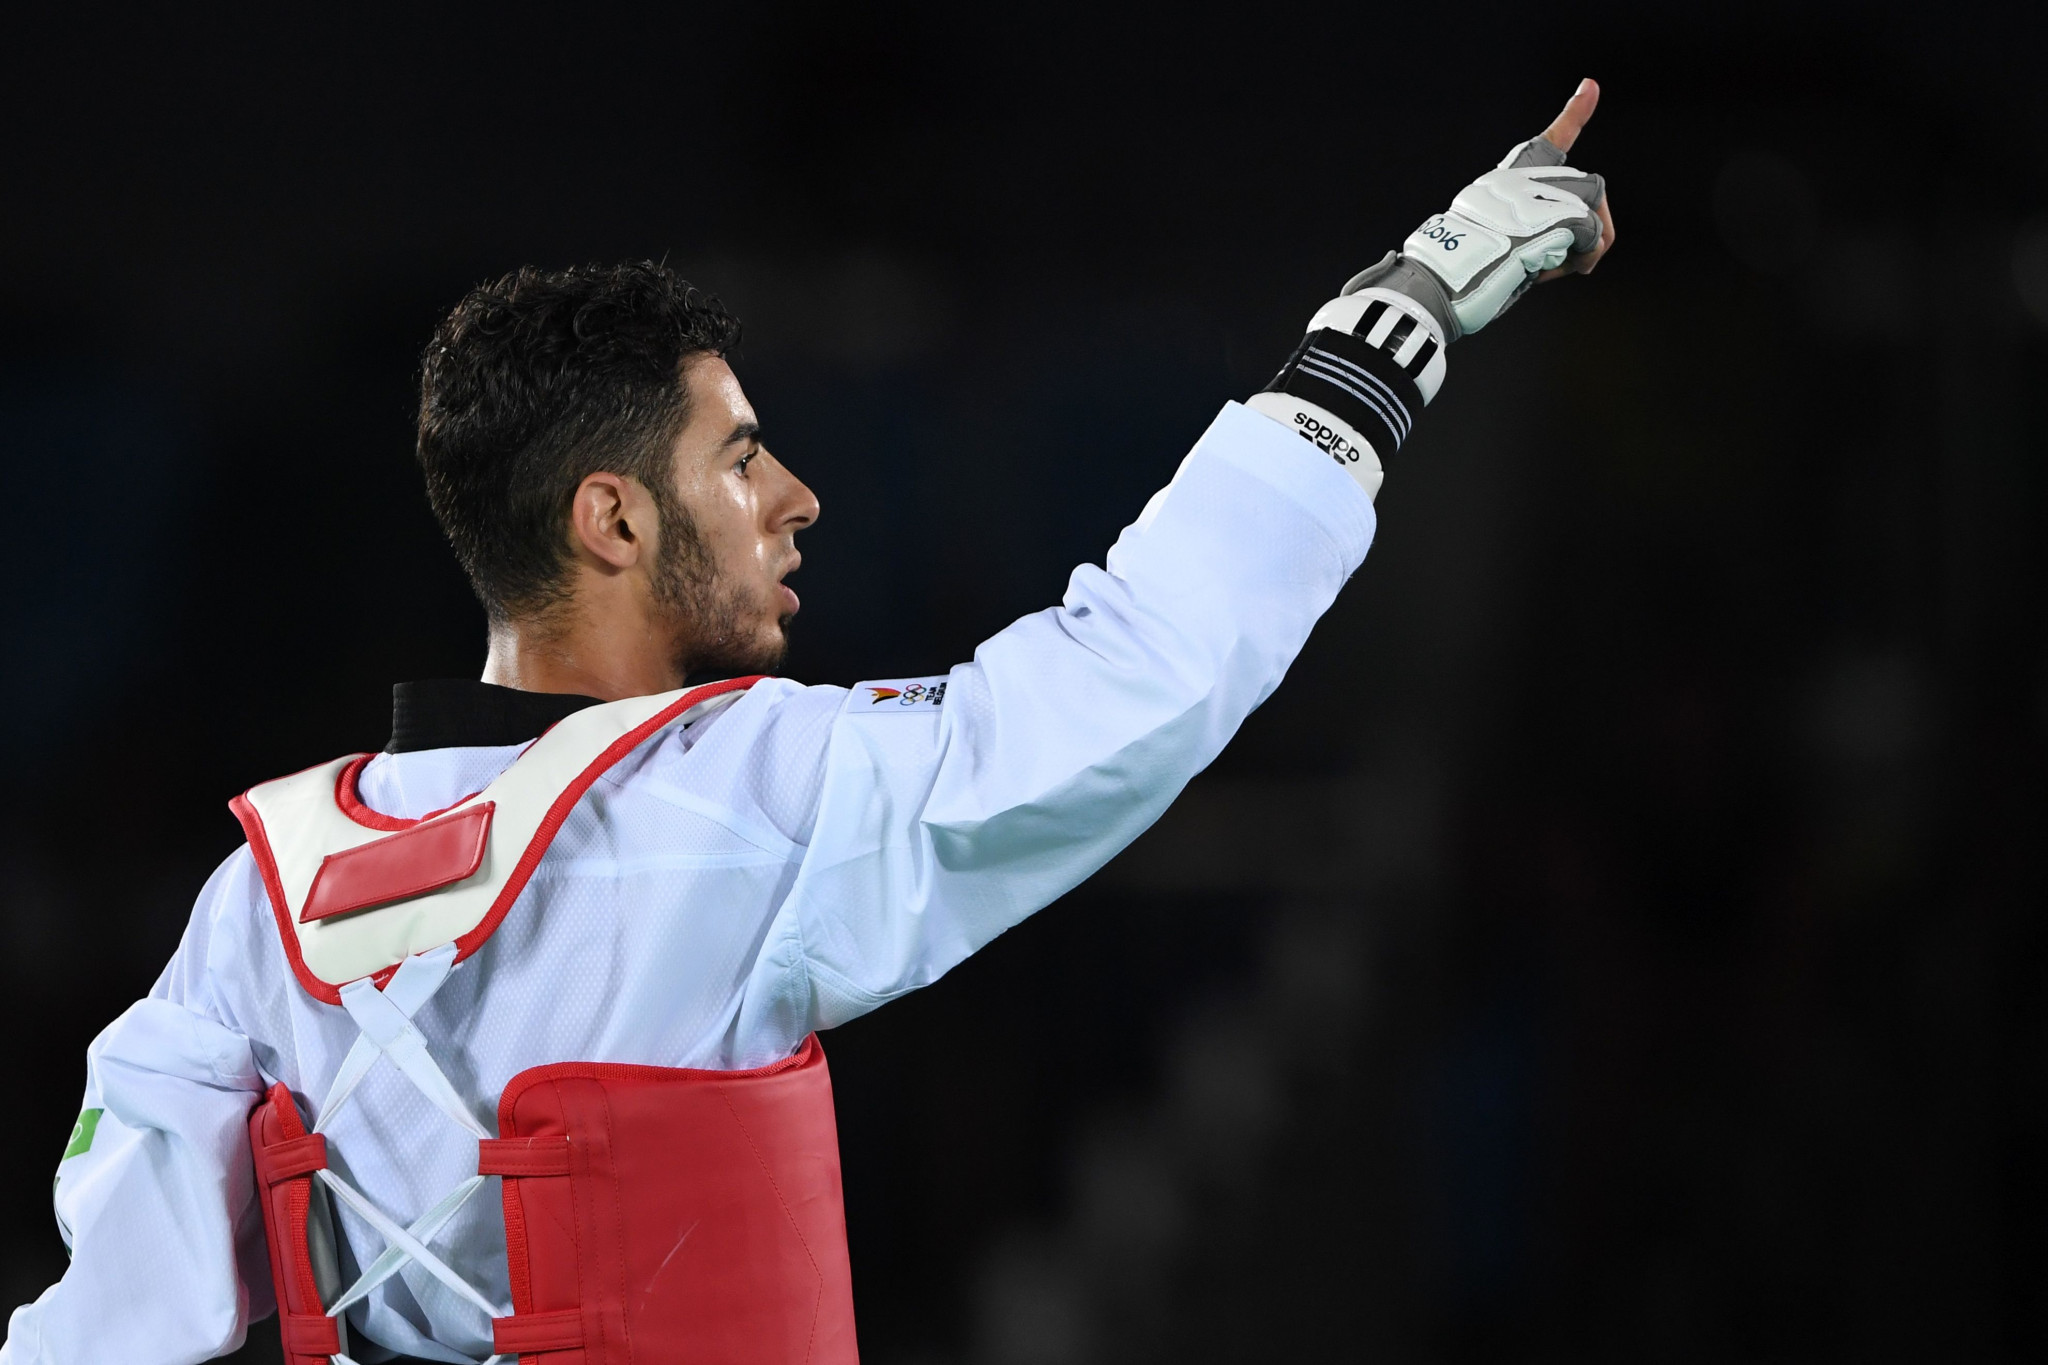 Former world champion Jaouad Achab is one of the athletes standing for the World Taekwondo Athletes' Committee ©Getty Images